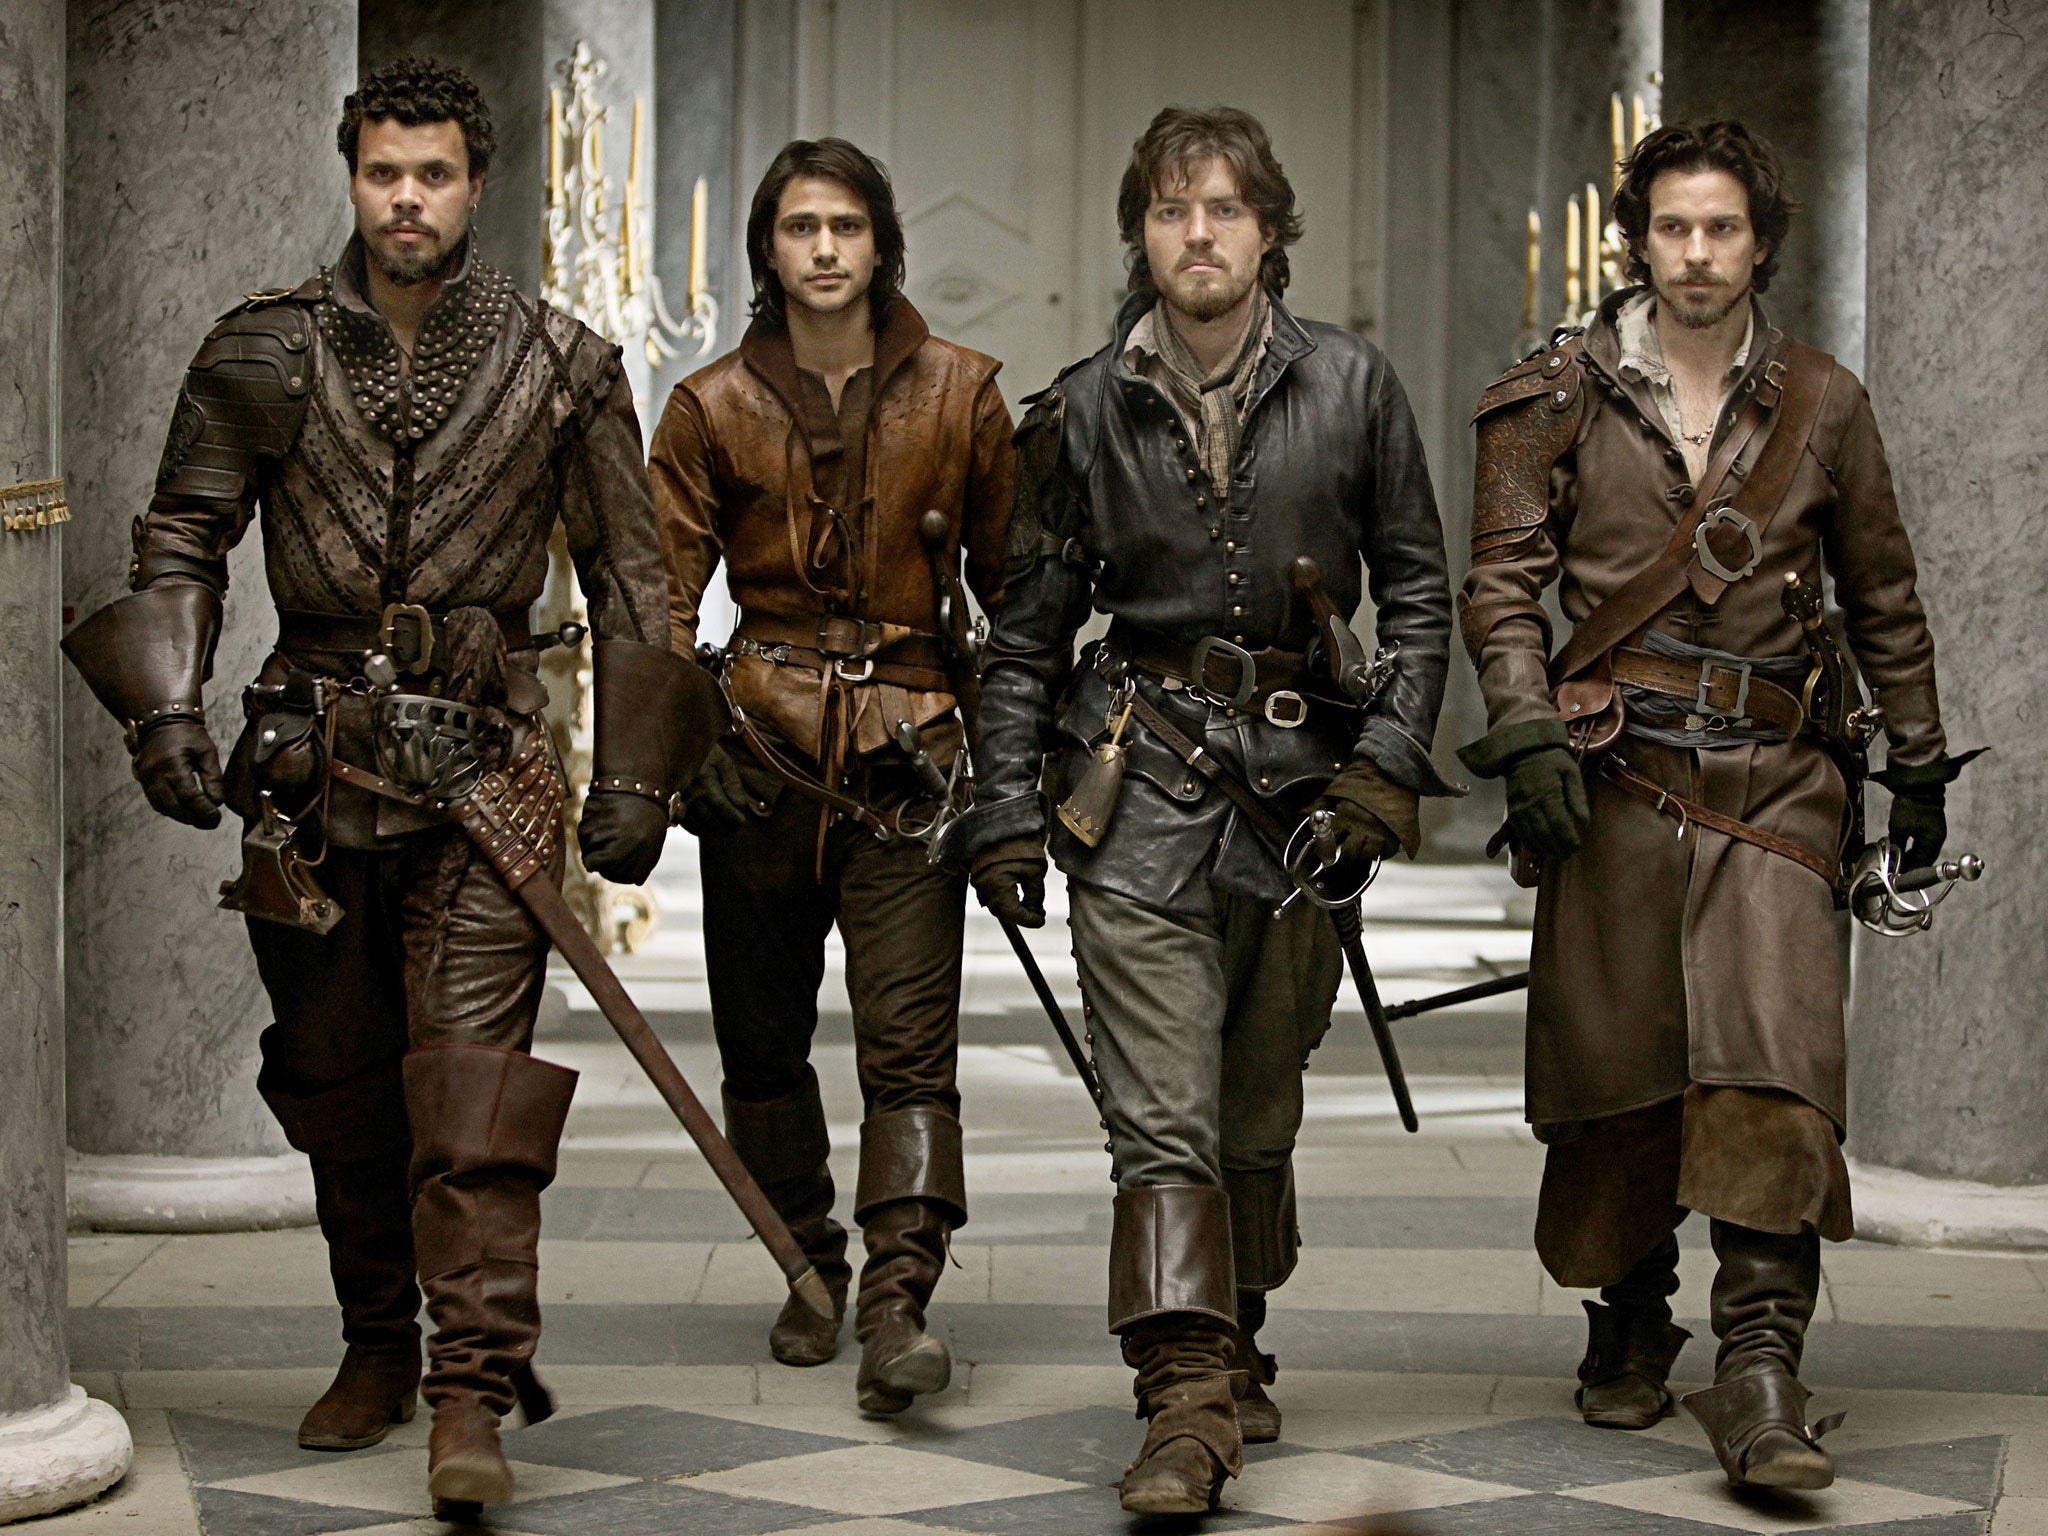 All for one and one for all: Porthos, d'Artagnan, Athos and Aramis in the new BBC production